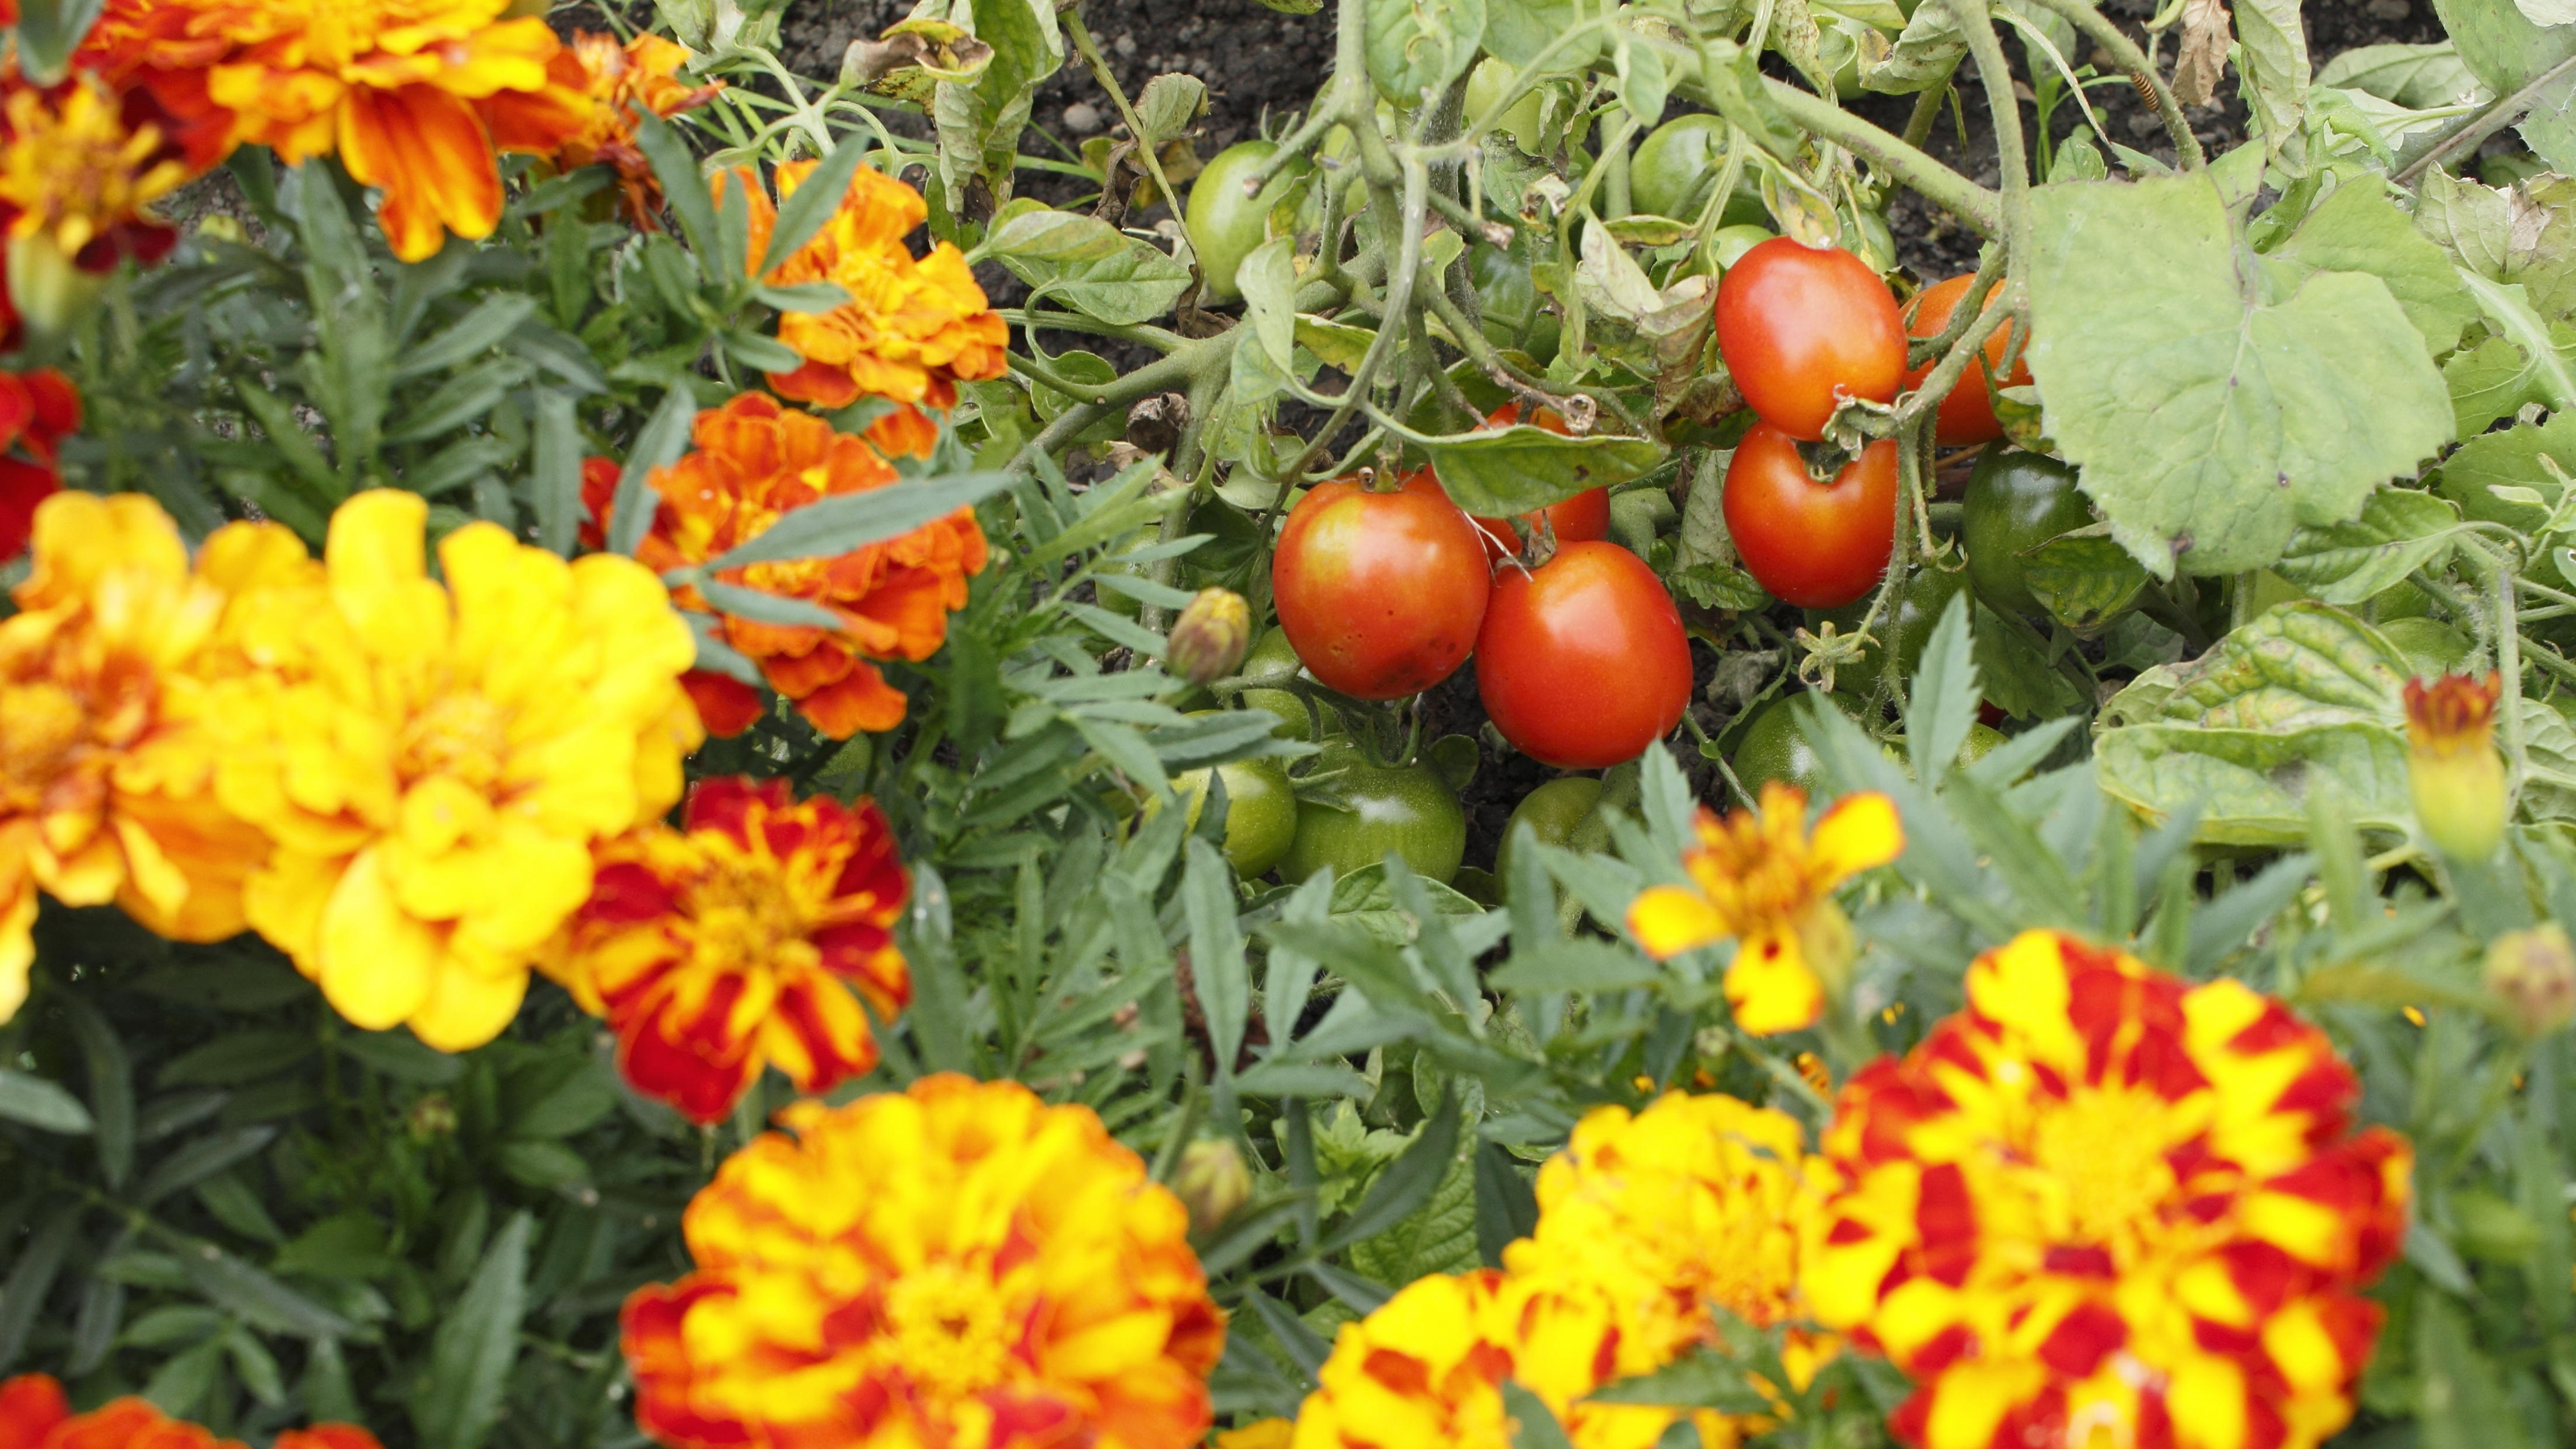 Image of French marigolds companion plant for tomatoes to keep pests away